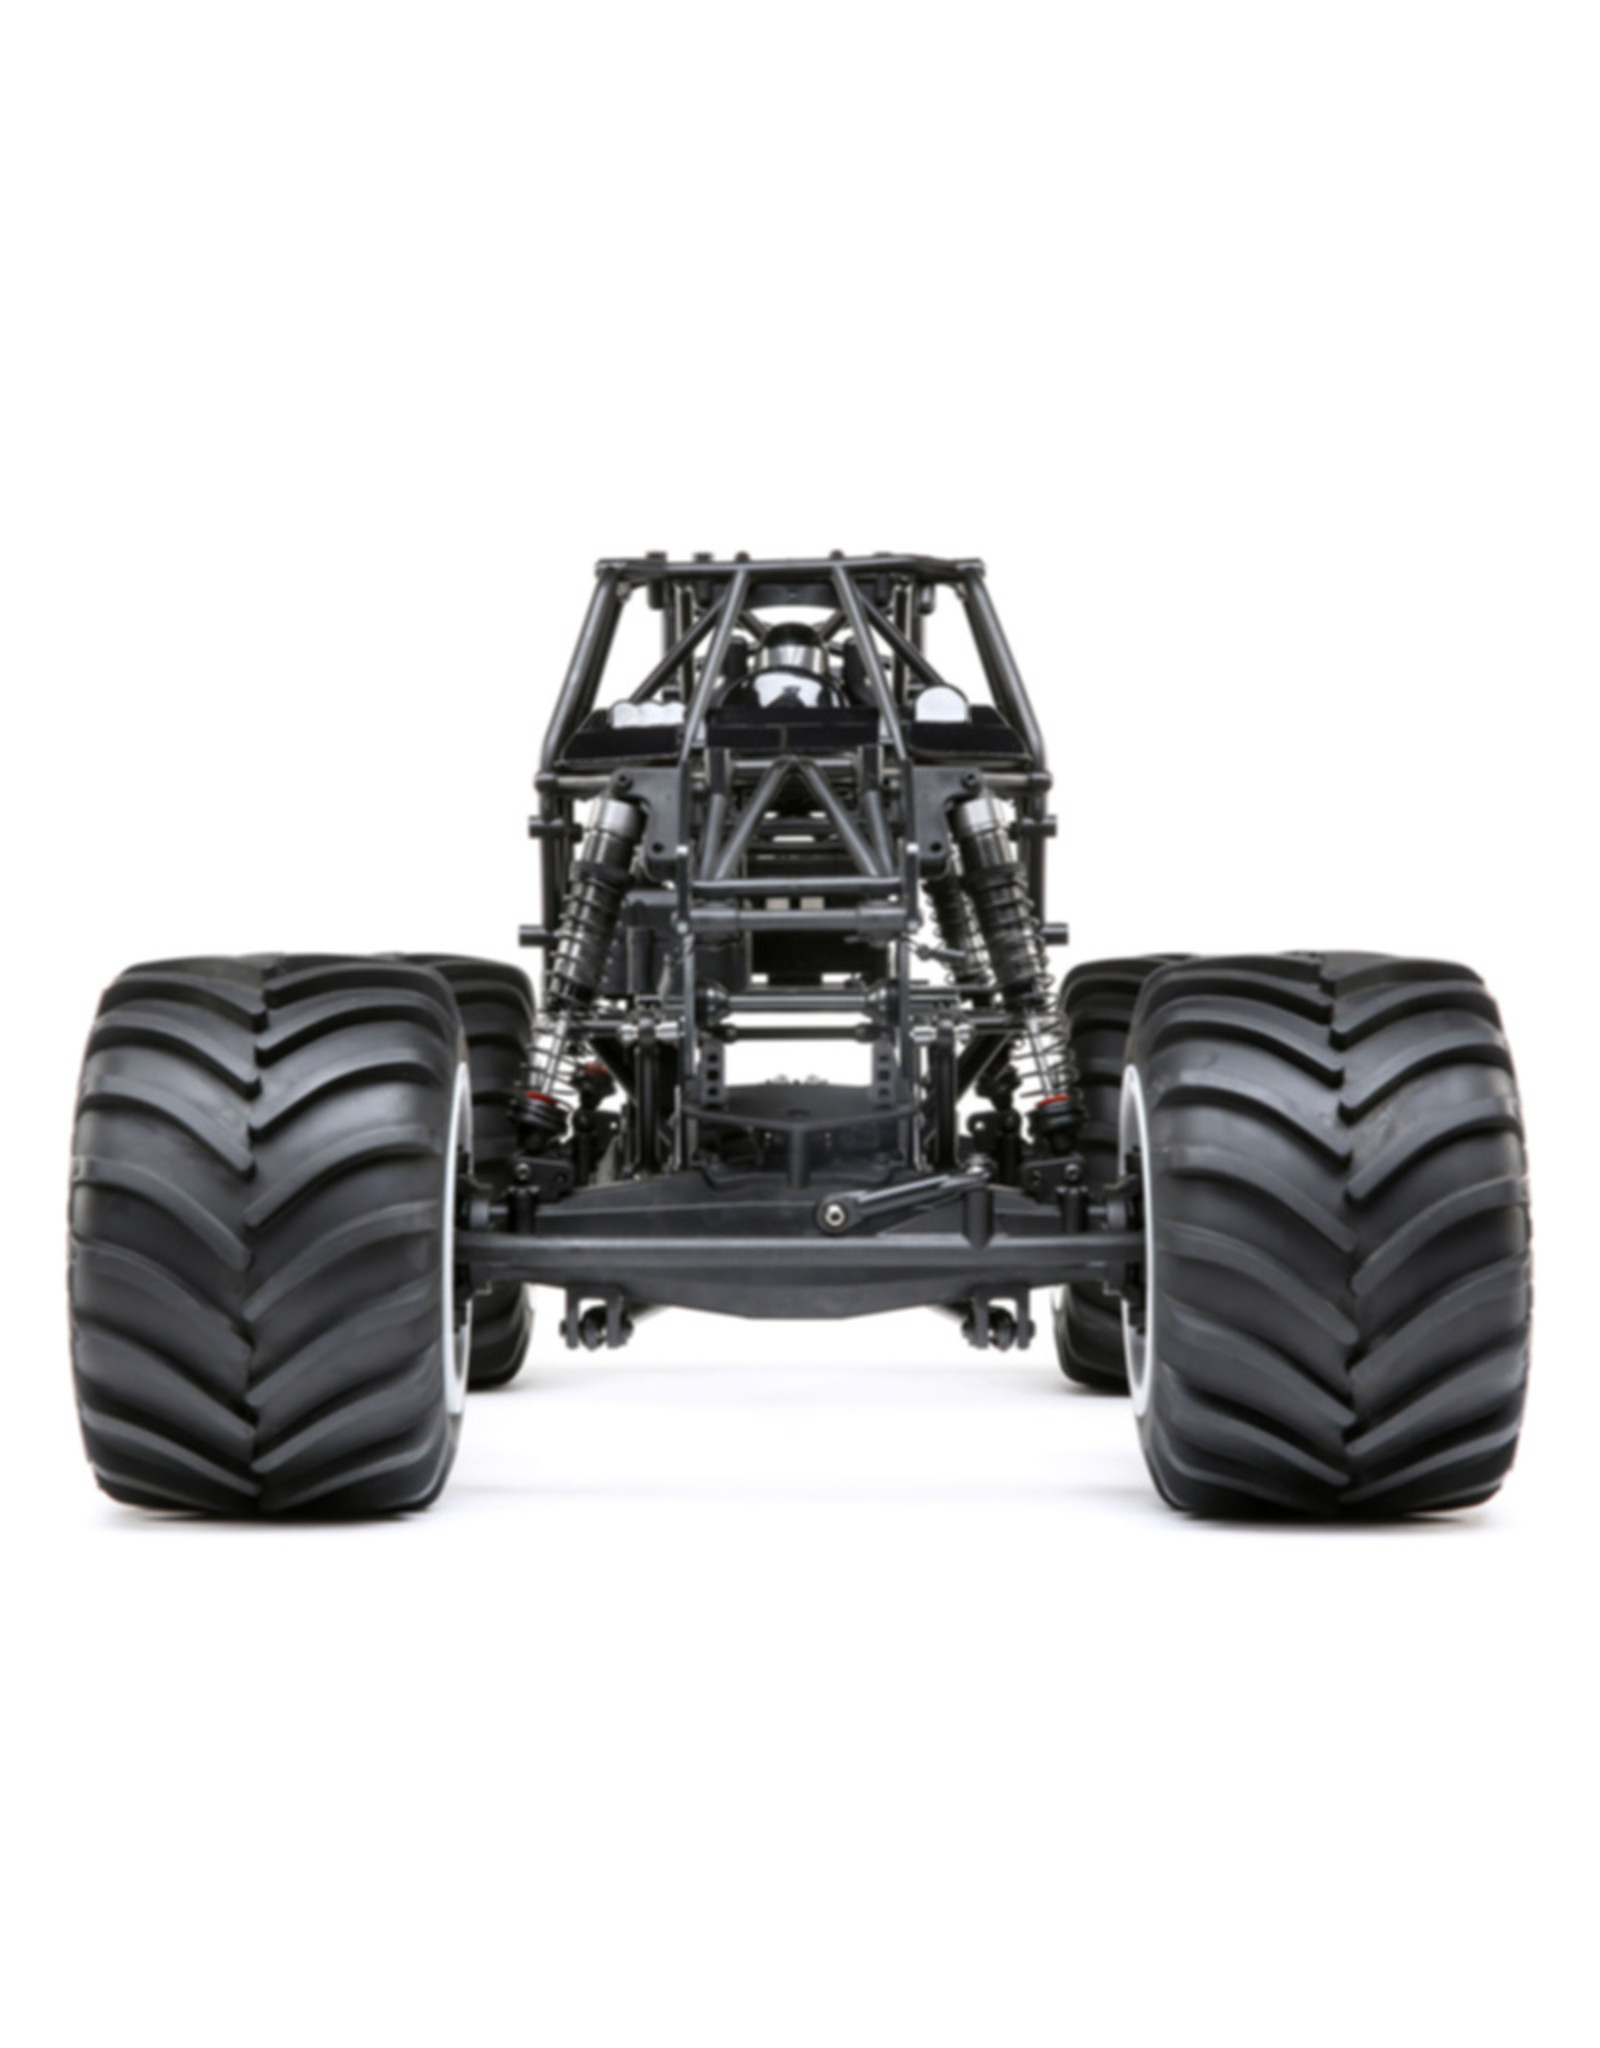 Losi LOS04022 LMT 4WD Solid Axle Monster Truck Roller